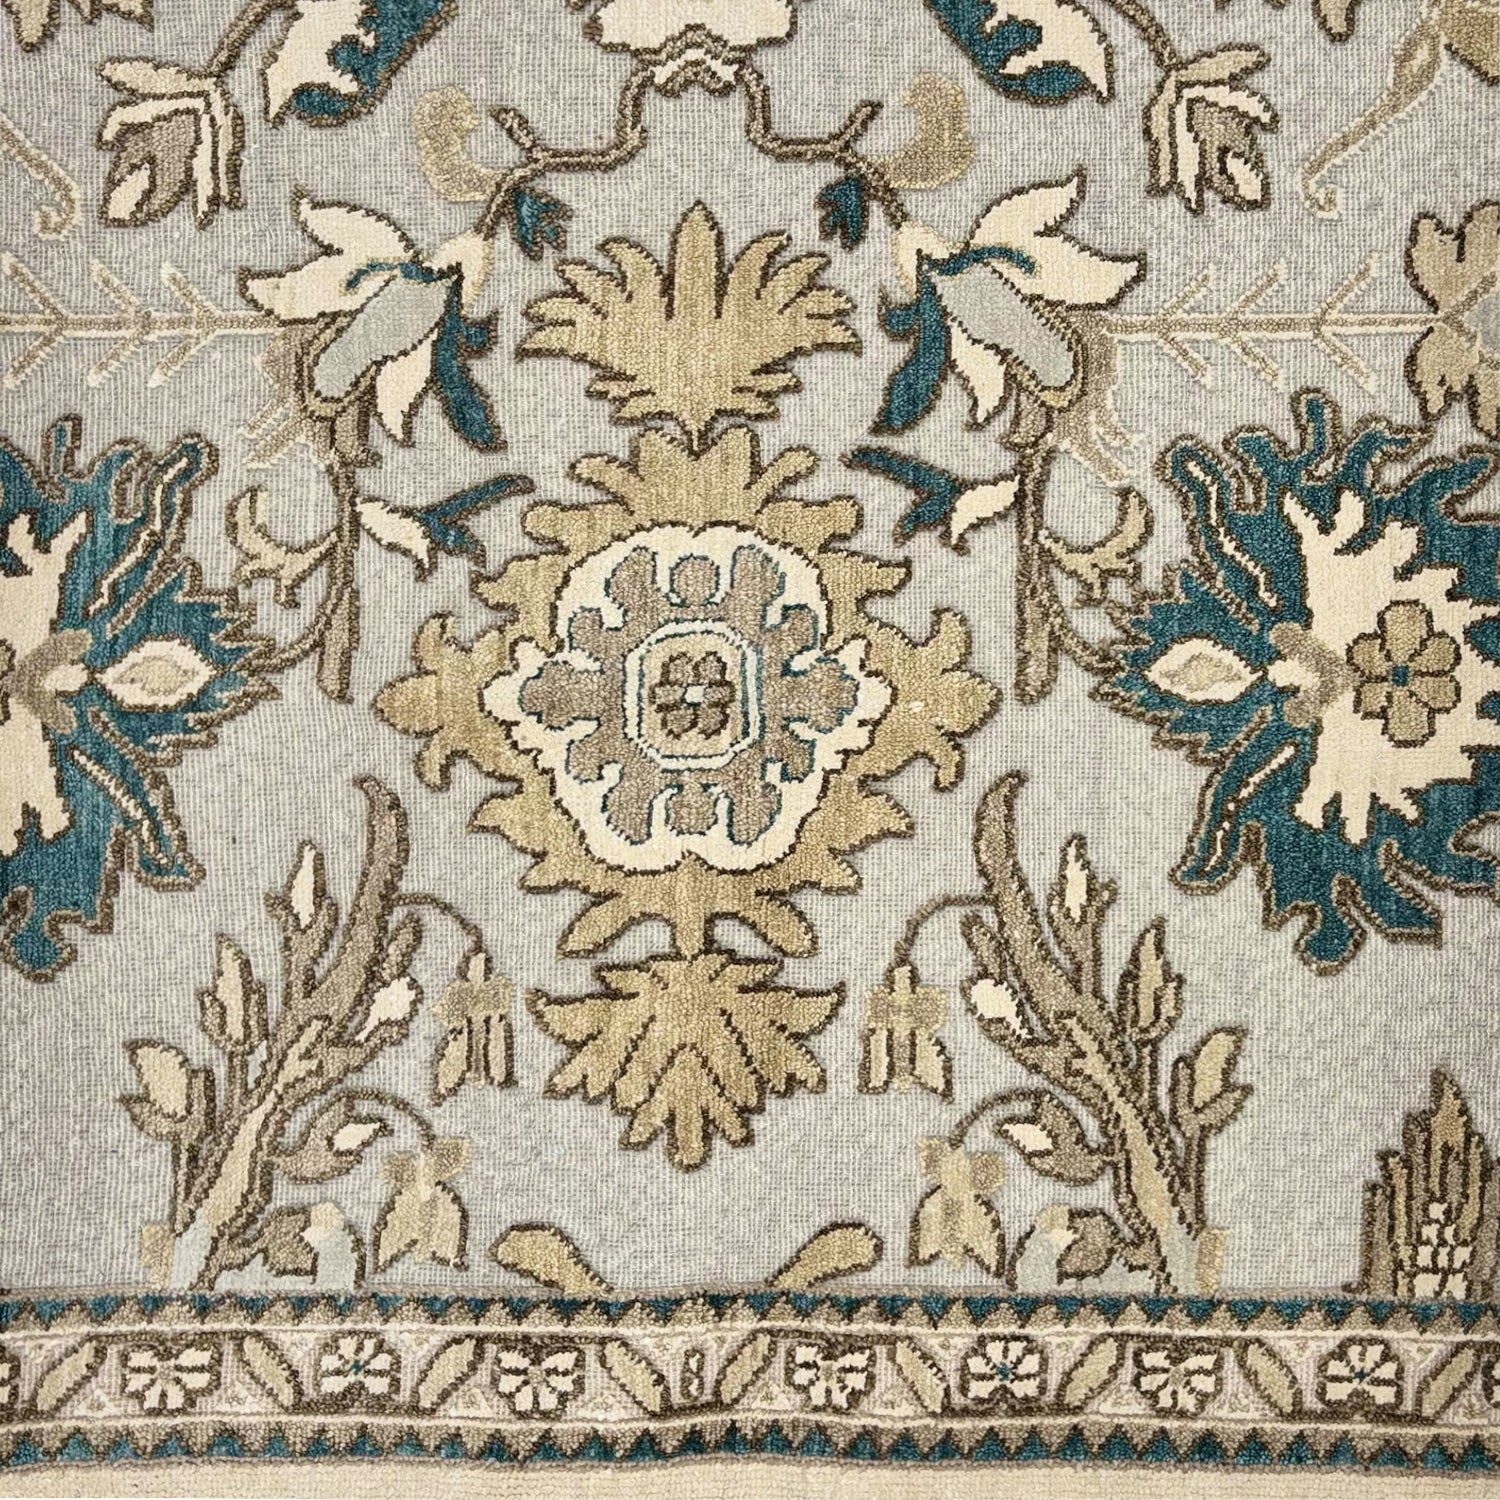 Detail of a rug with an old world inspired pattern in cream, grey and teal.